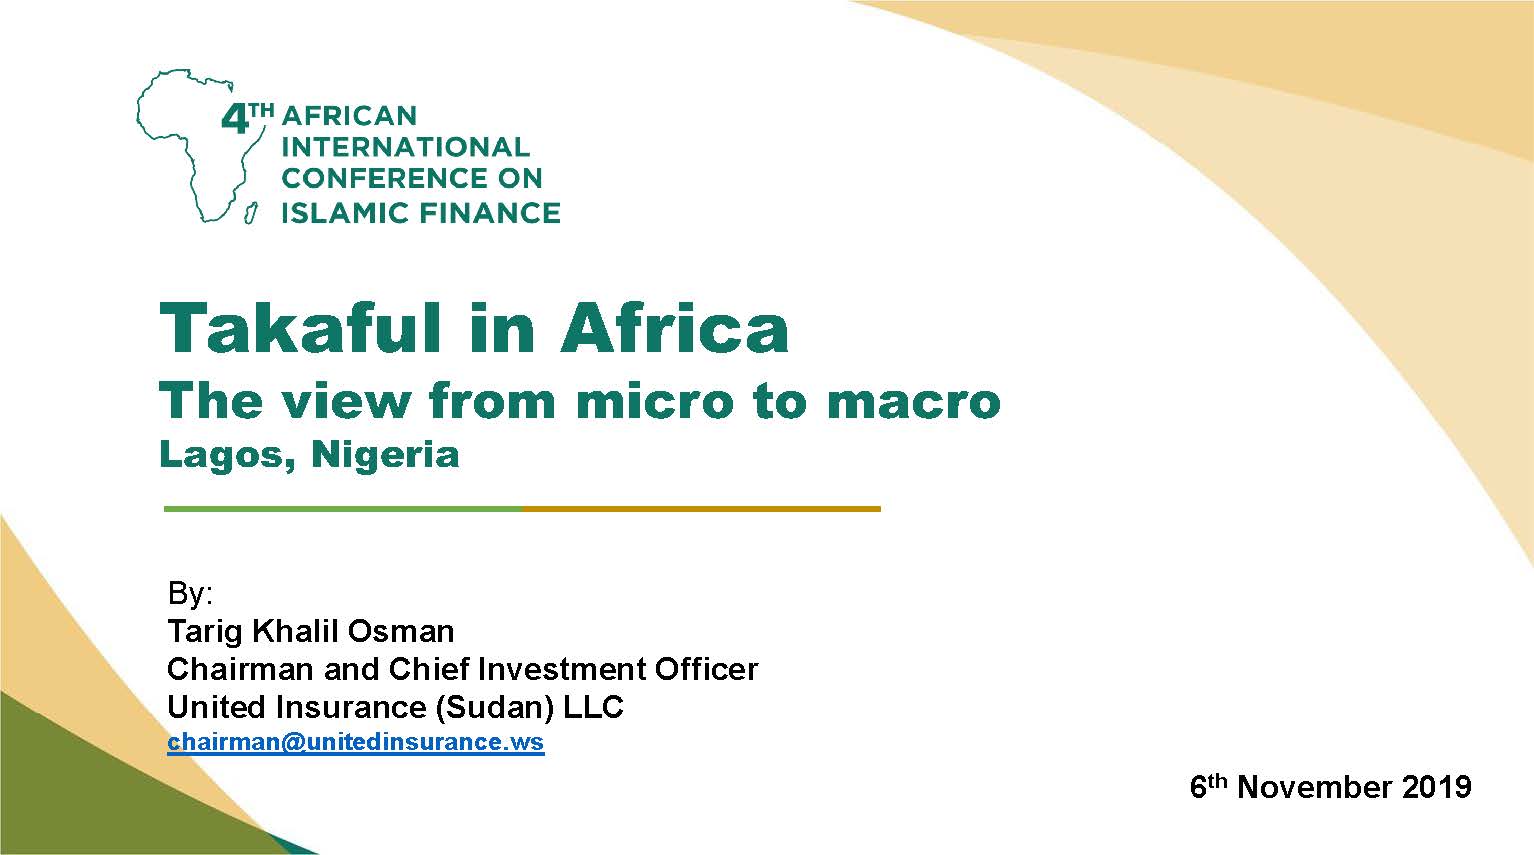 <center> Takaful in Africa : <br> The view from micro to macro </center>